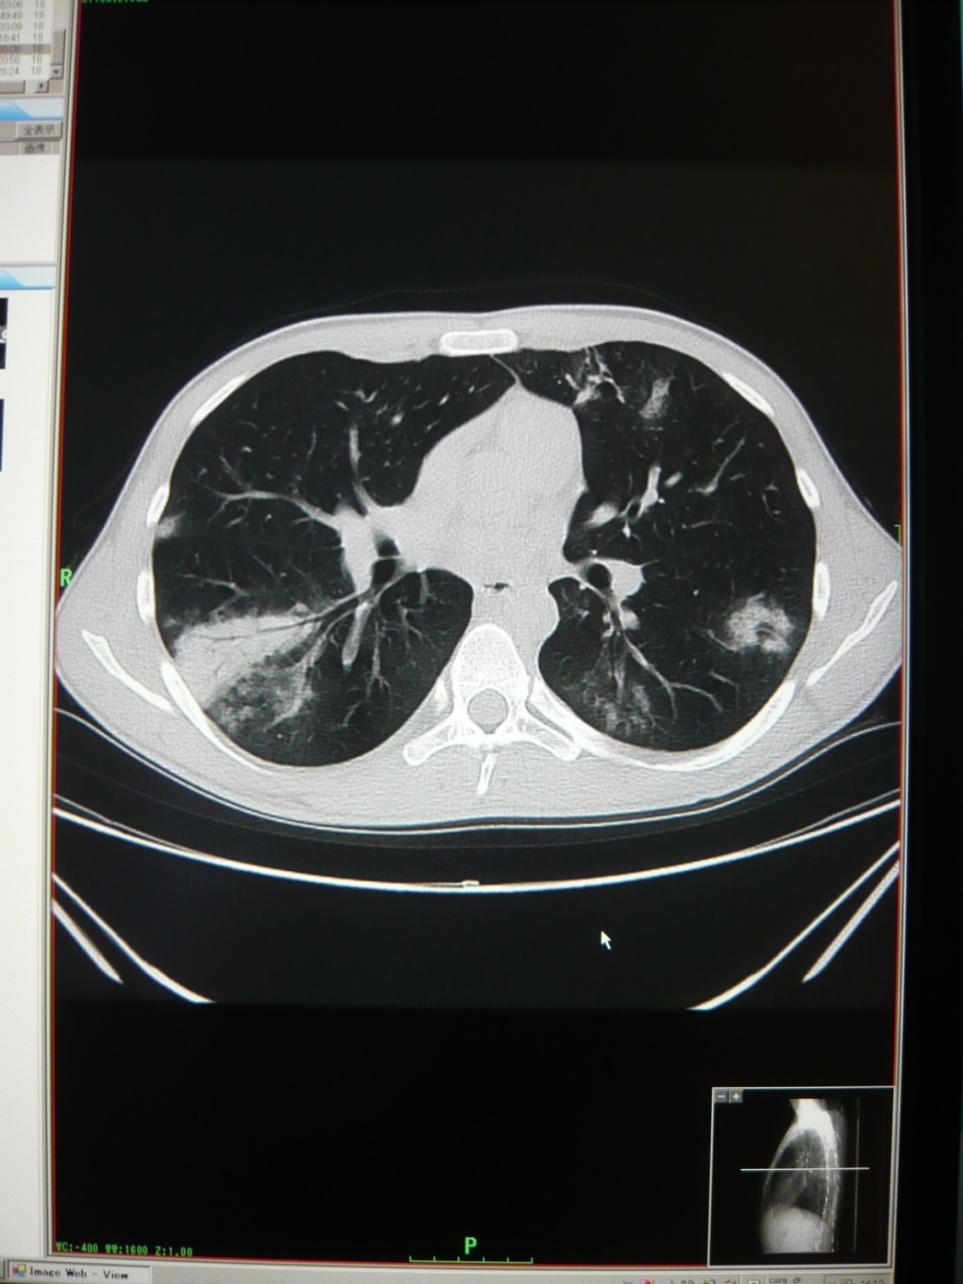 Chest CT CT of the chest shows multiple